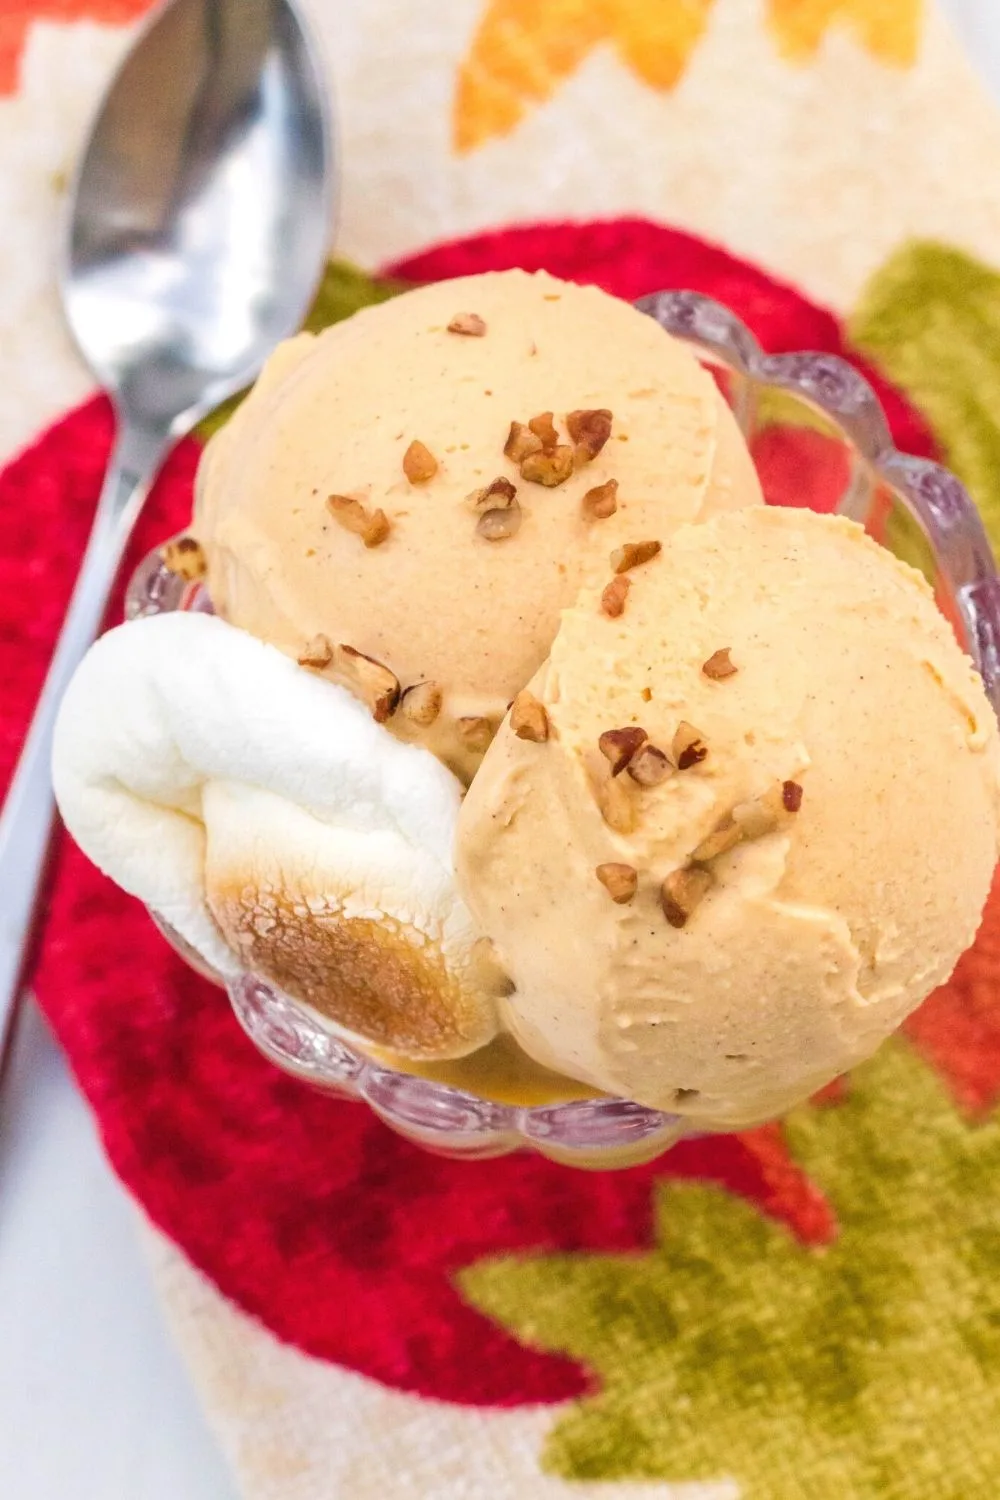 overhead view of a dessert cup filled with sweet potato ice cream, sprinkled with pecans and garnished with a marshmallow. A spoon is next to the dish.